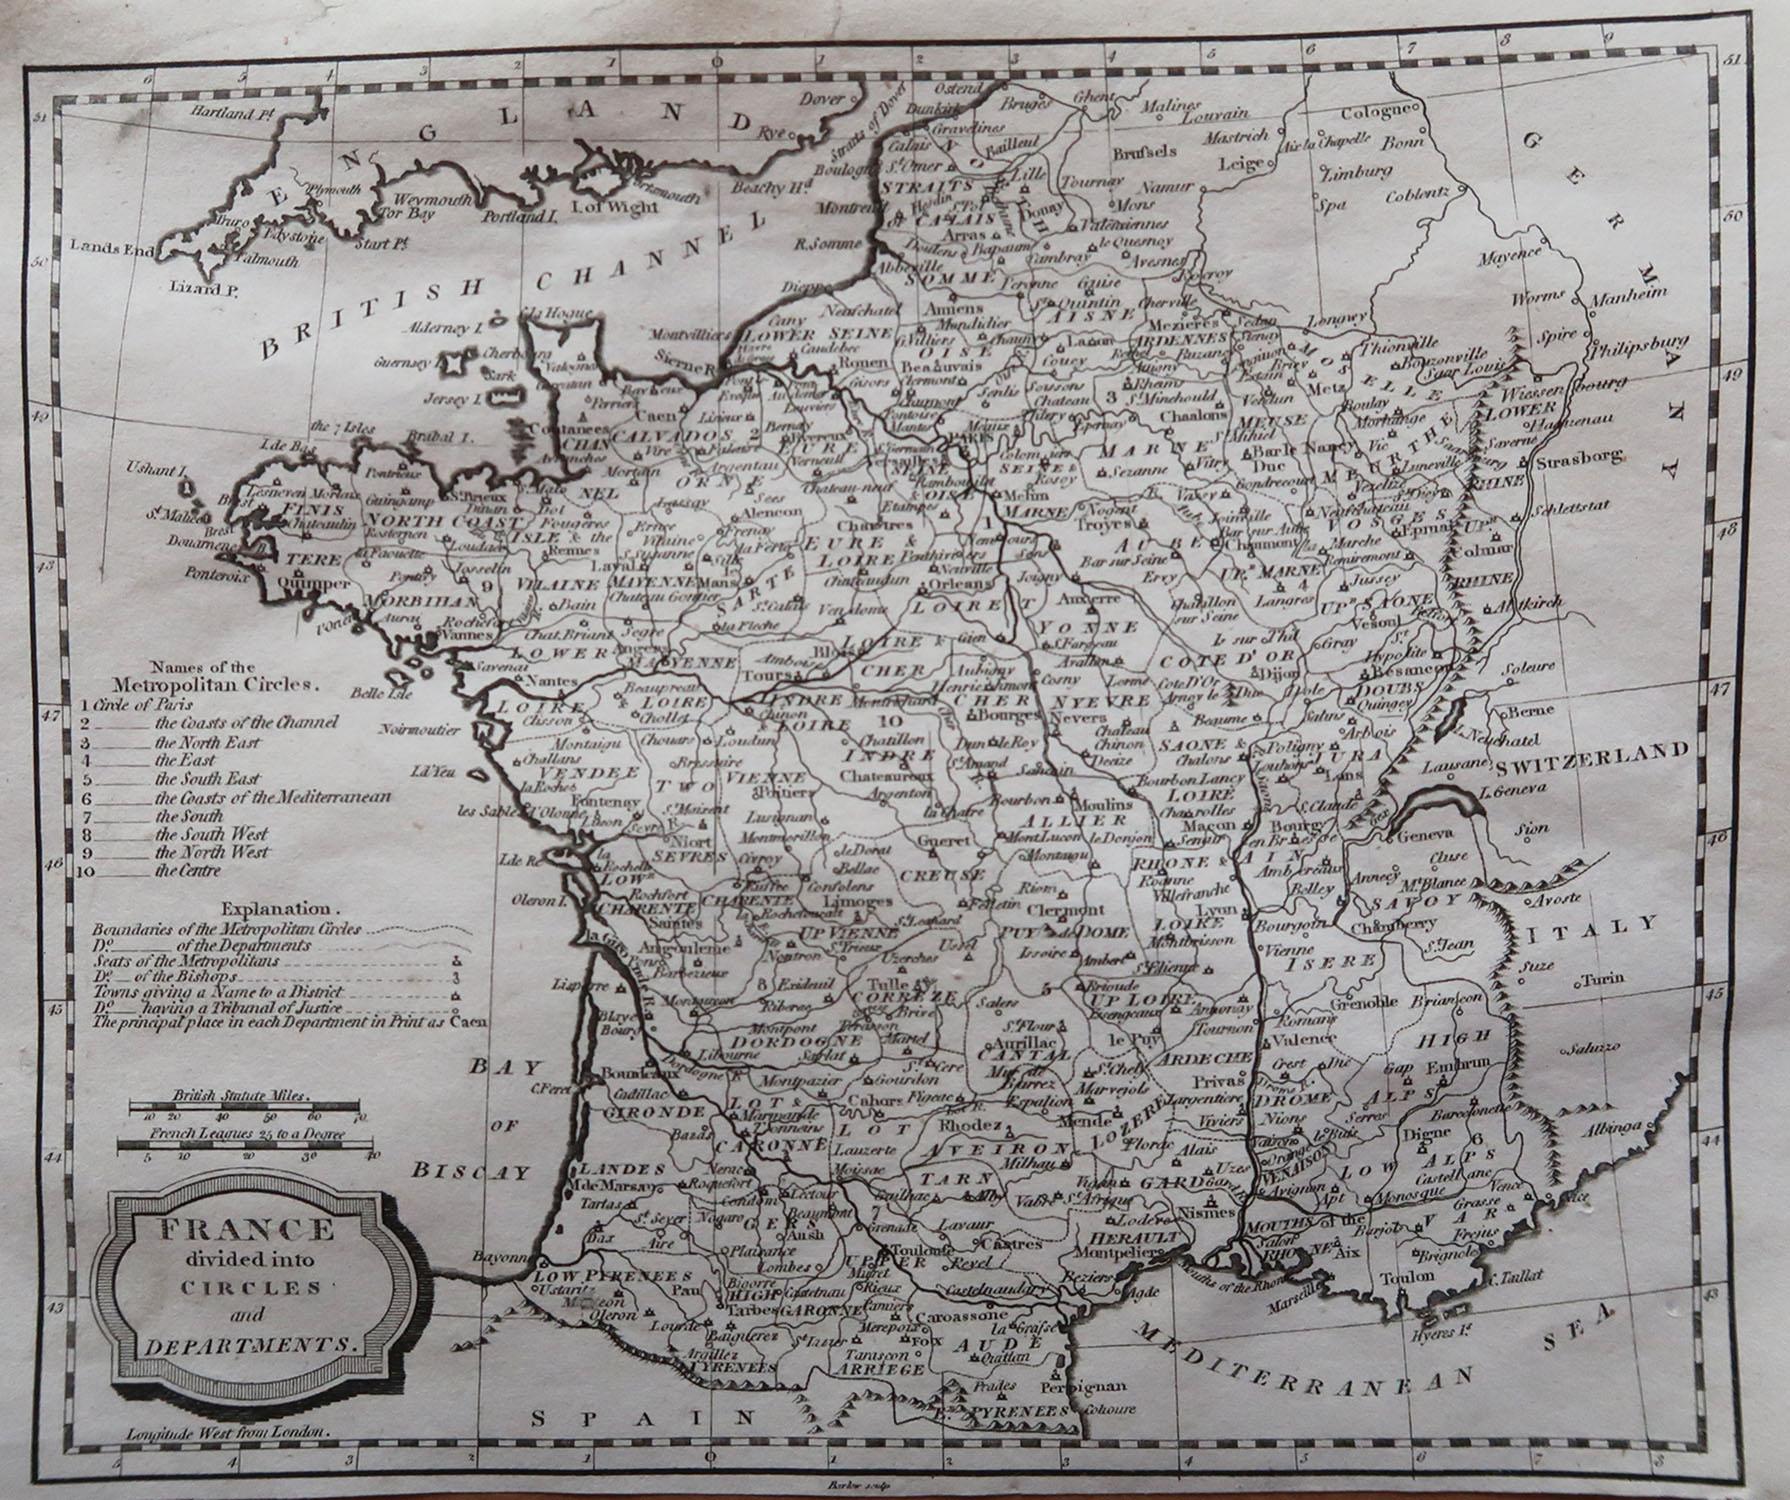 Great map of France

Copper-plate engraving by Barlow

Published by Brightly & Kinnersly, Bungay, Suffolk. 1806

Unframed.

Repair to a minor edge tear top edge.